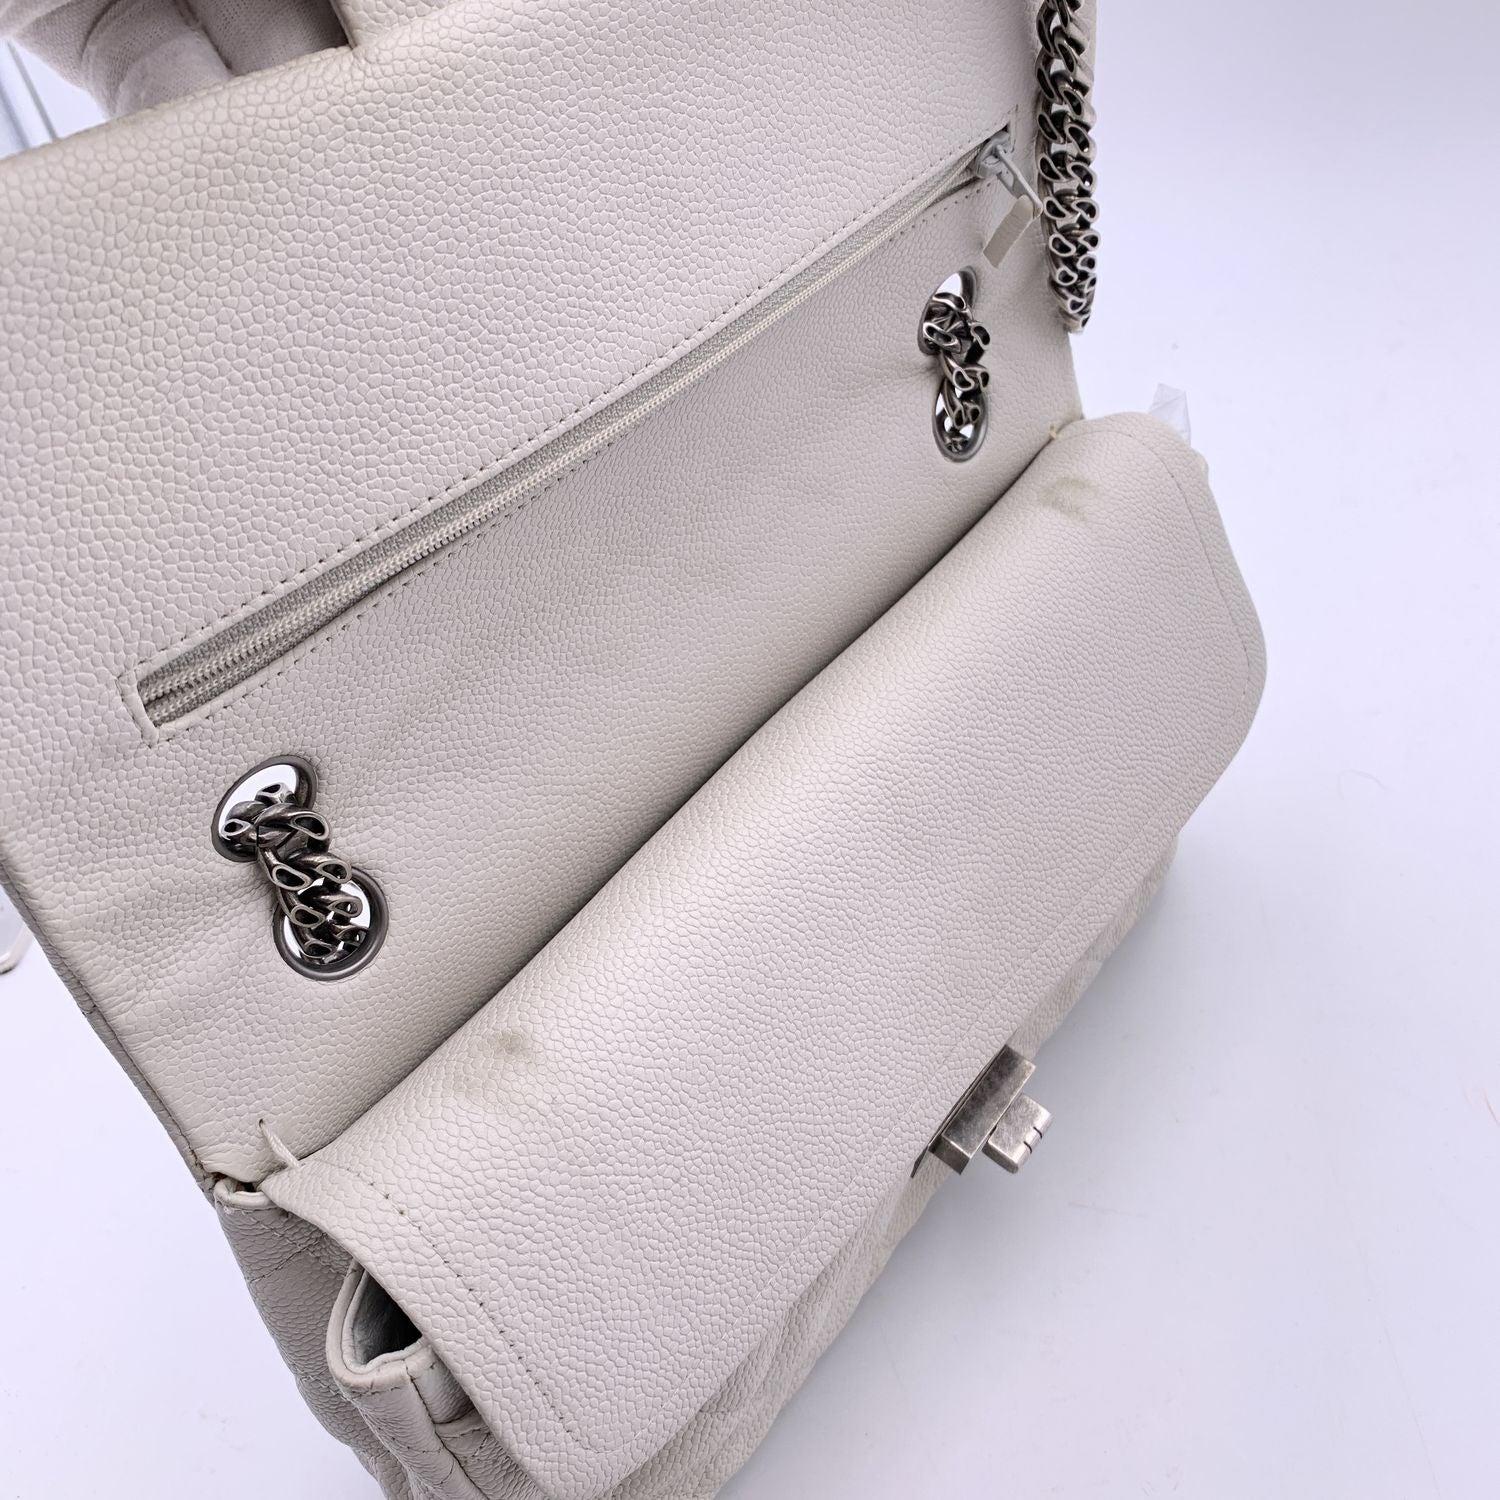 Chanel White Leather Reissue 2.55 Double Flap 225 Shoulder Bag 2000s In Good Condition For Sale In Rome, Rome